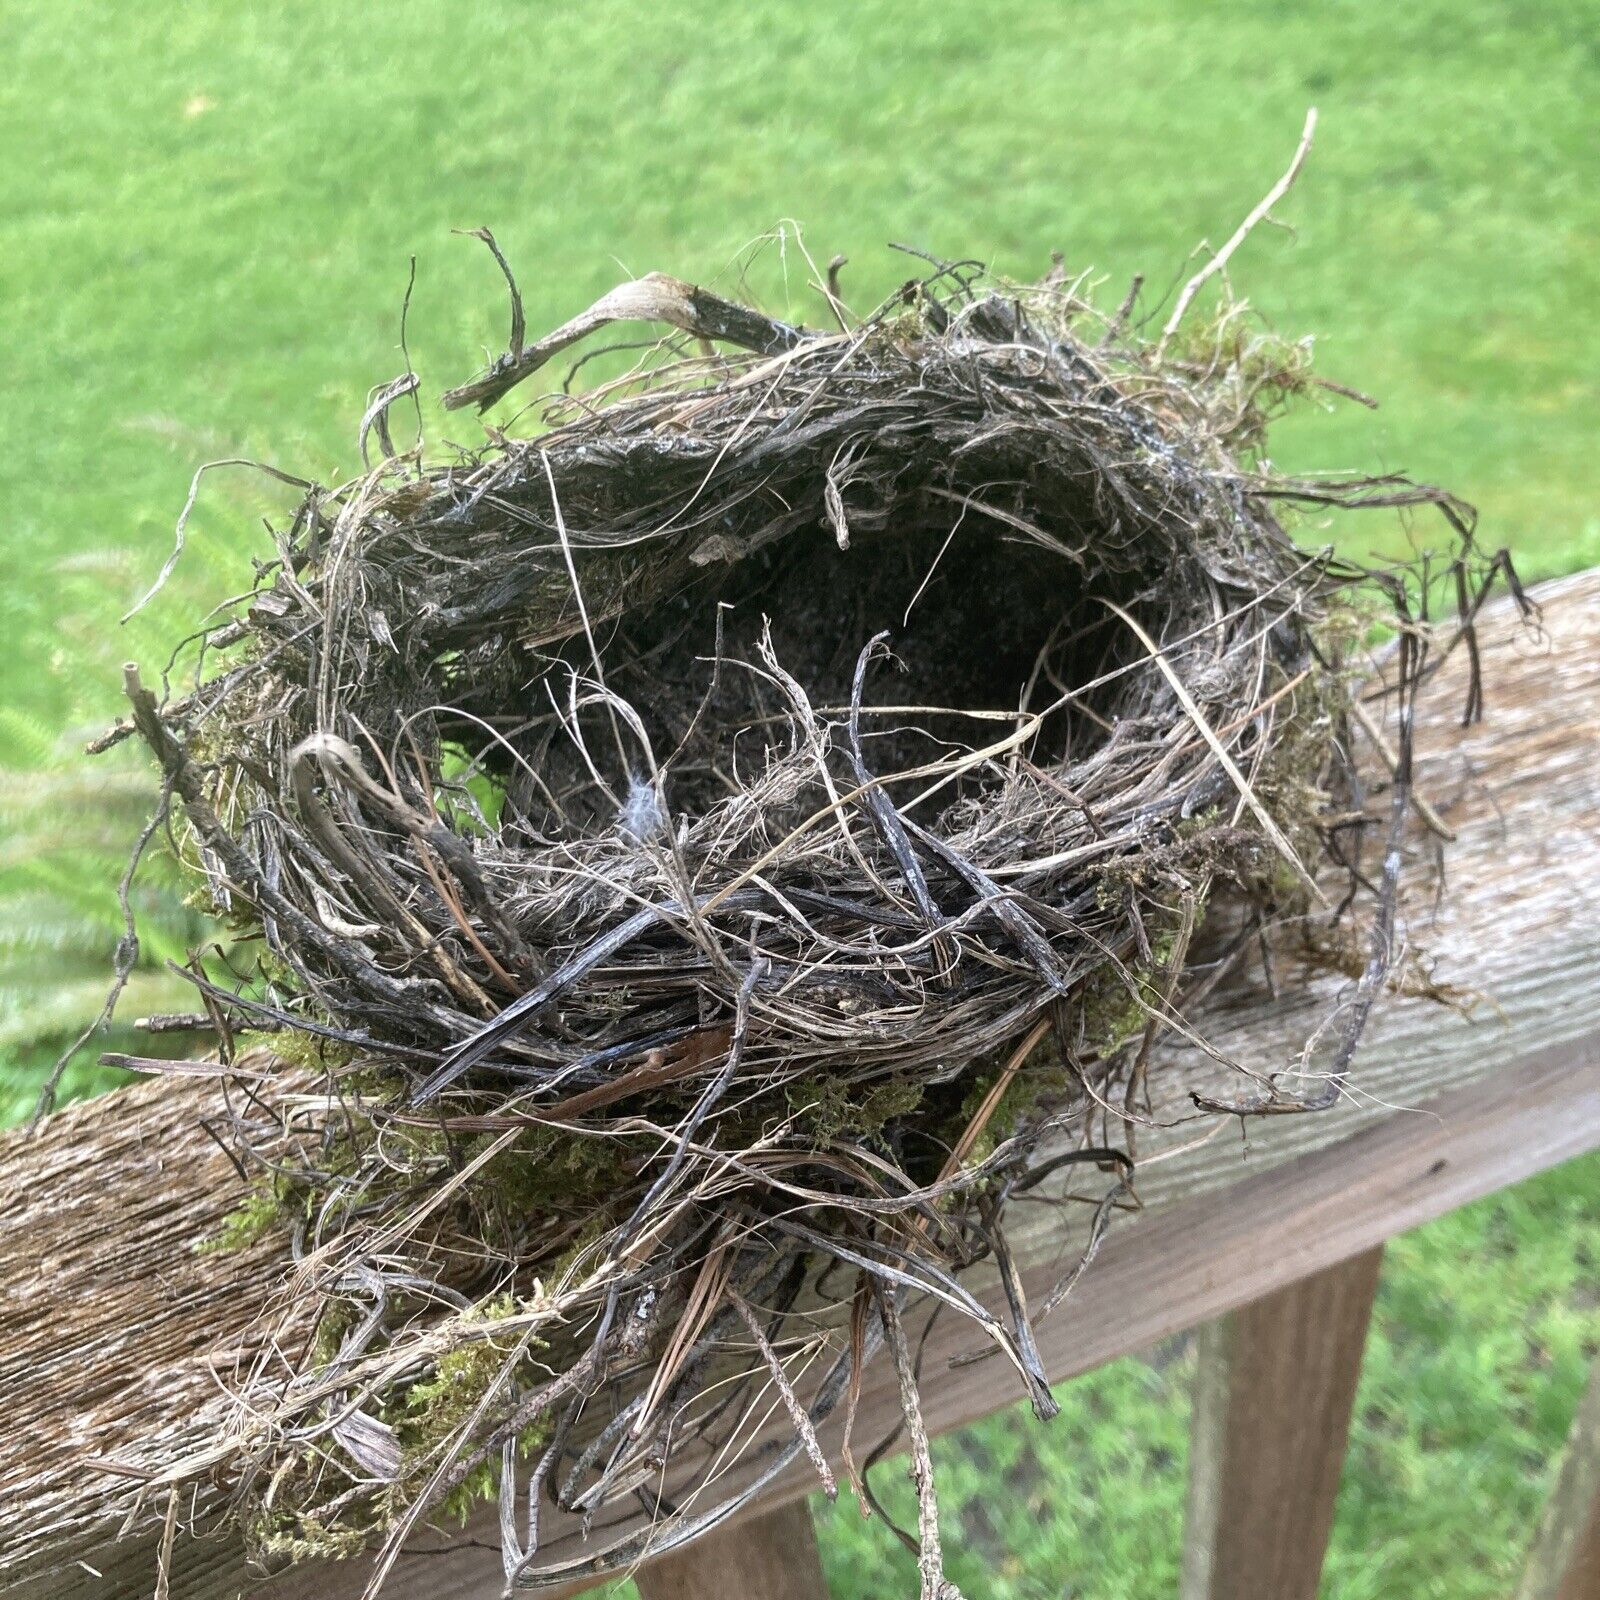 Real-life Bird Sparrow’s Nest made from grasses, twigs, moss and mud.